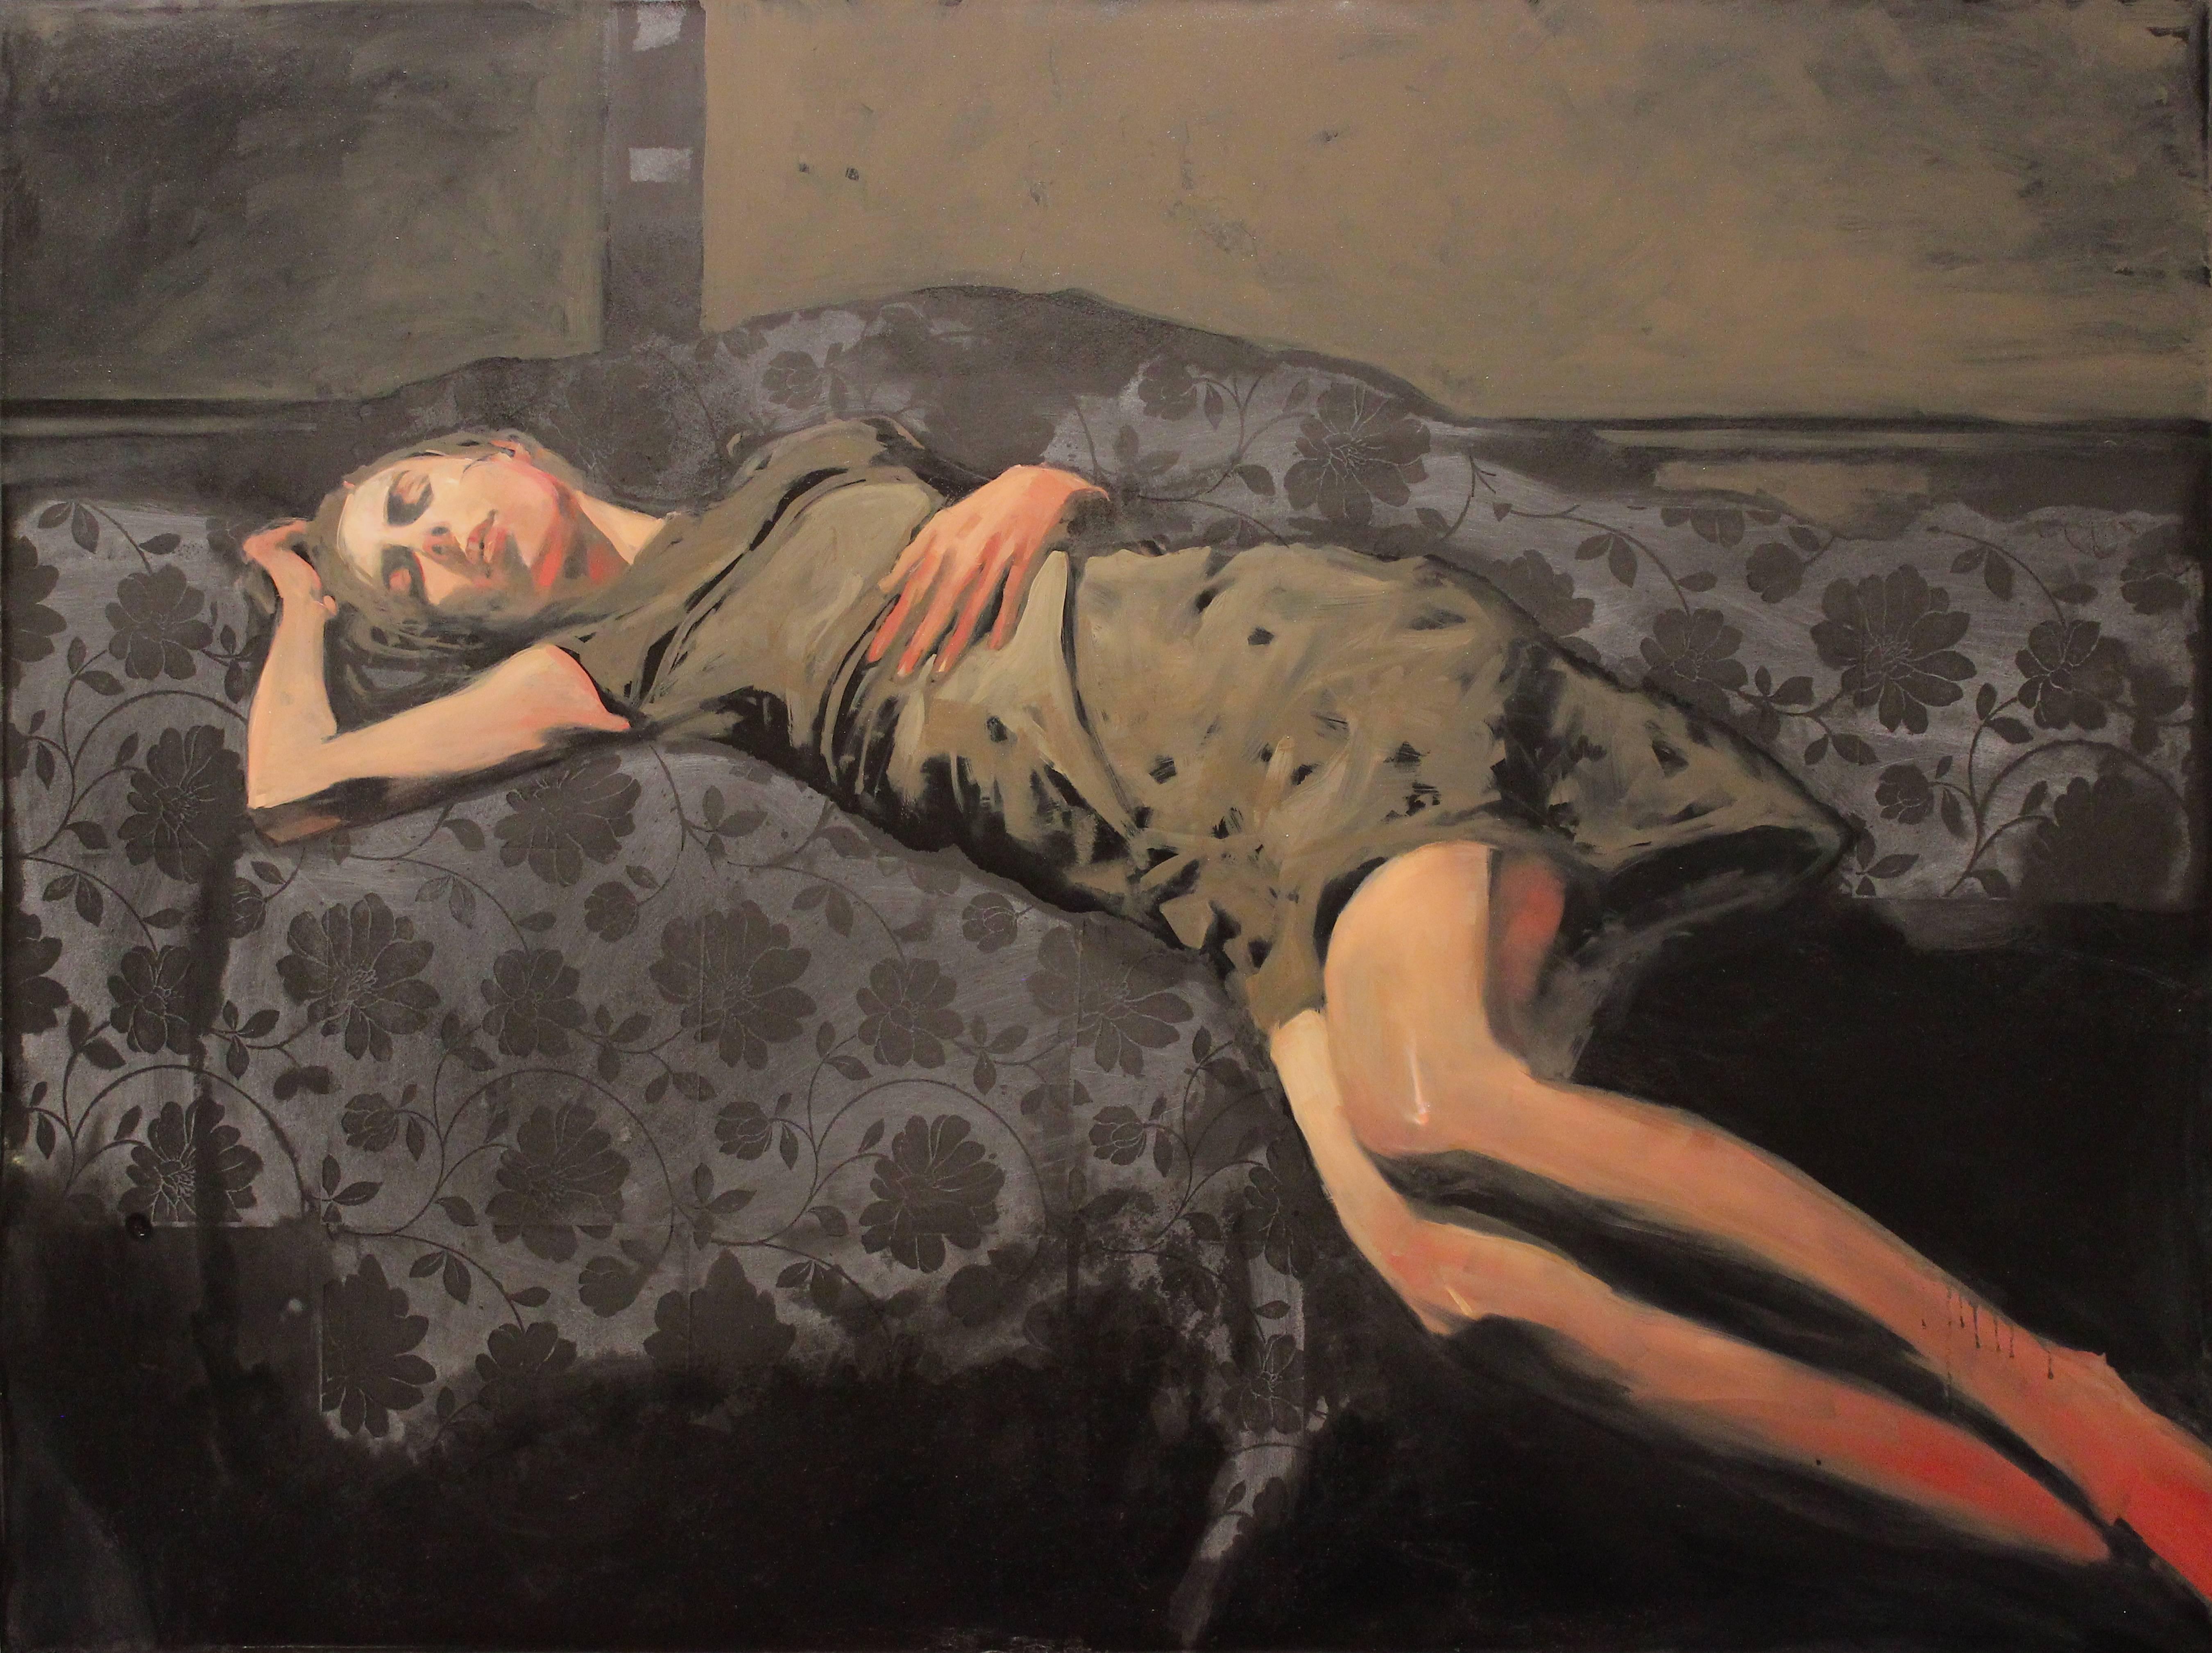 Michael Carson Figurative Painting - "Fever"